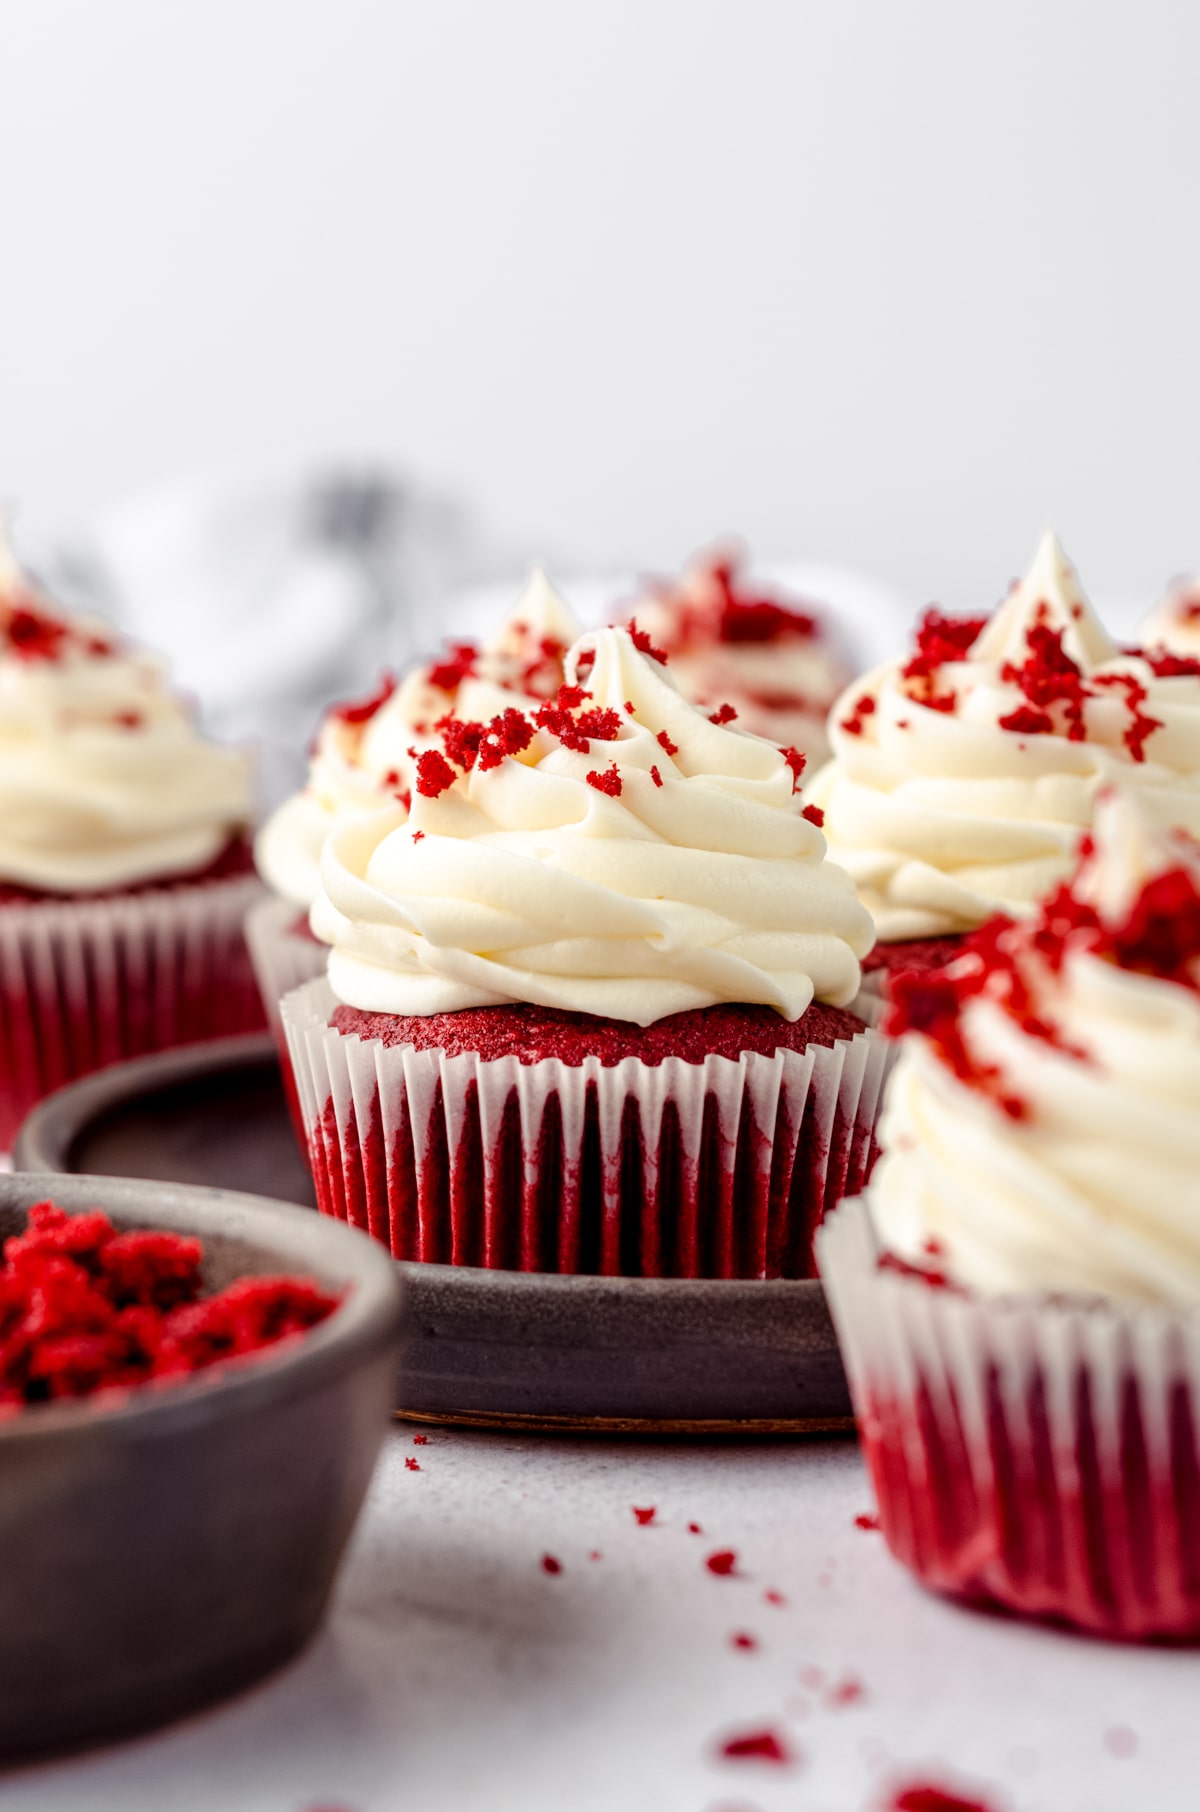 A plate of red velvet cupcakes with cream cheese frosting and red velvet crumbs on top.